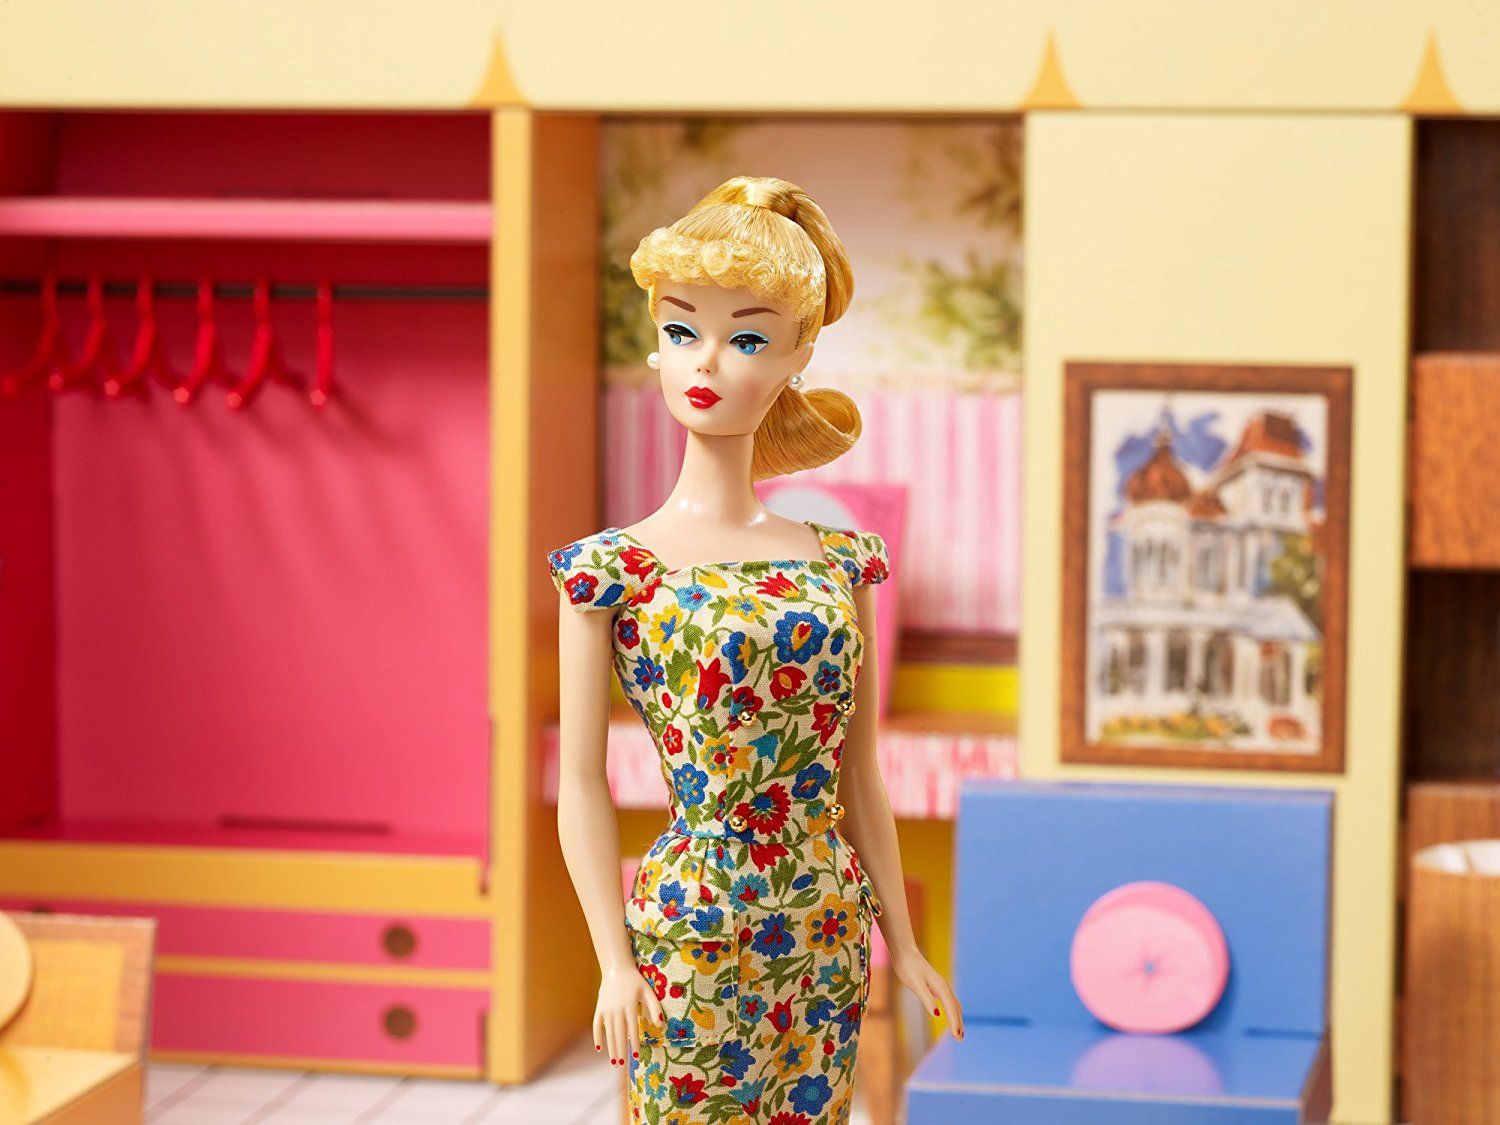 The Original Barbie Dream House Is Back And Our Inner Child Is Screaming With Joy